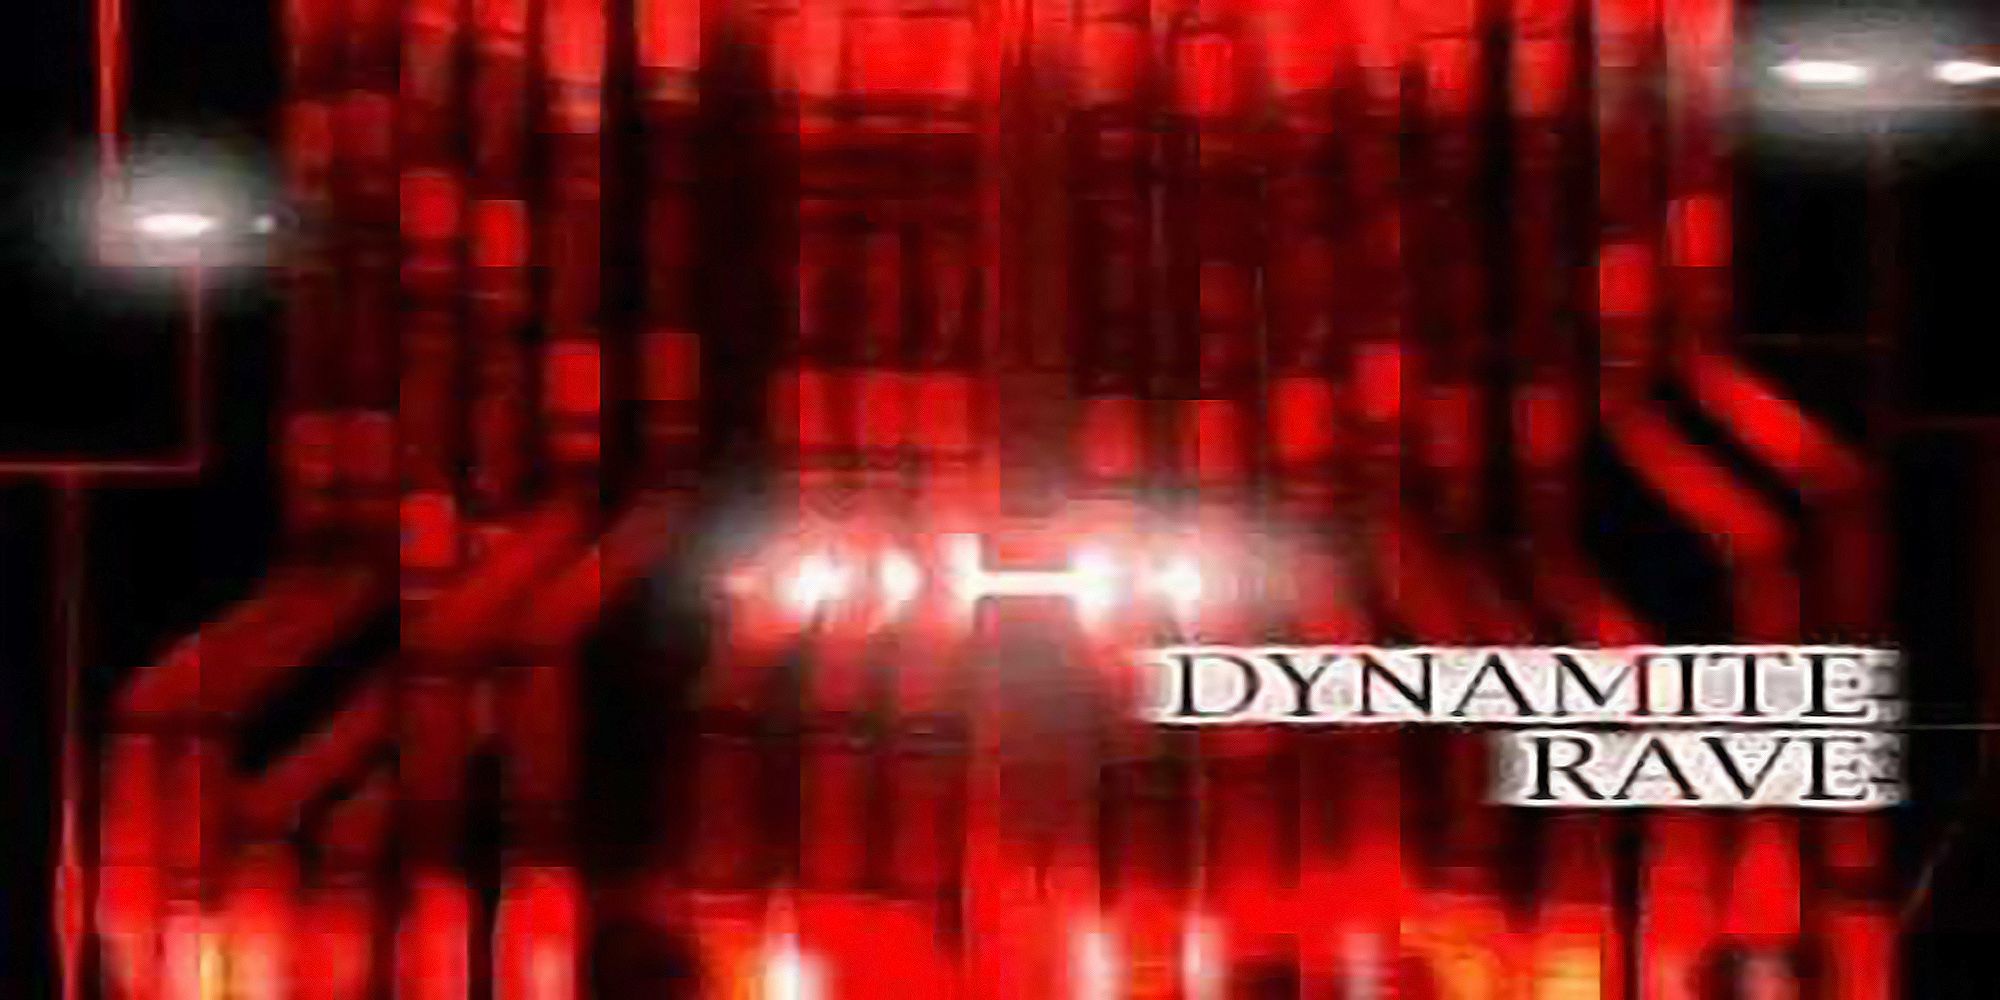 A system of dark red pipes adorn the background art of the track, Dynamite Rave, from Dance Dance Revolution 3rd Mix.